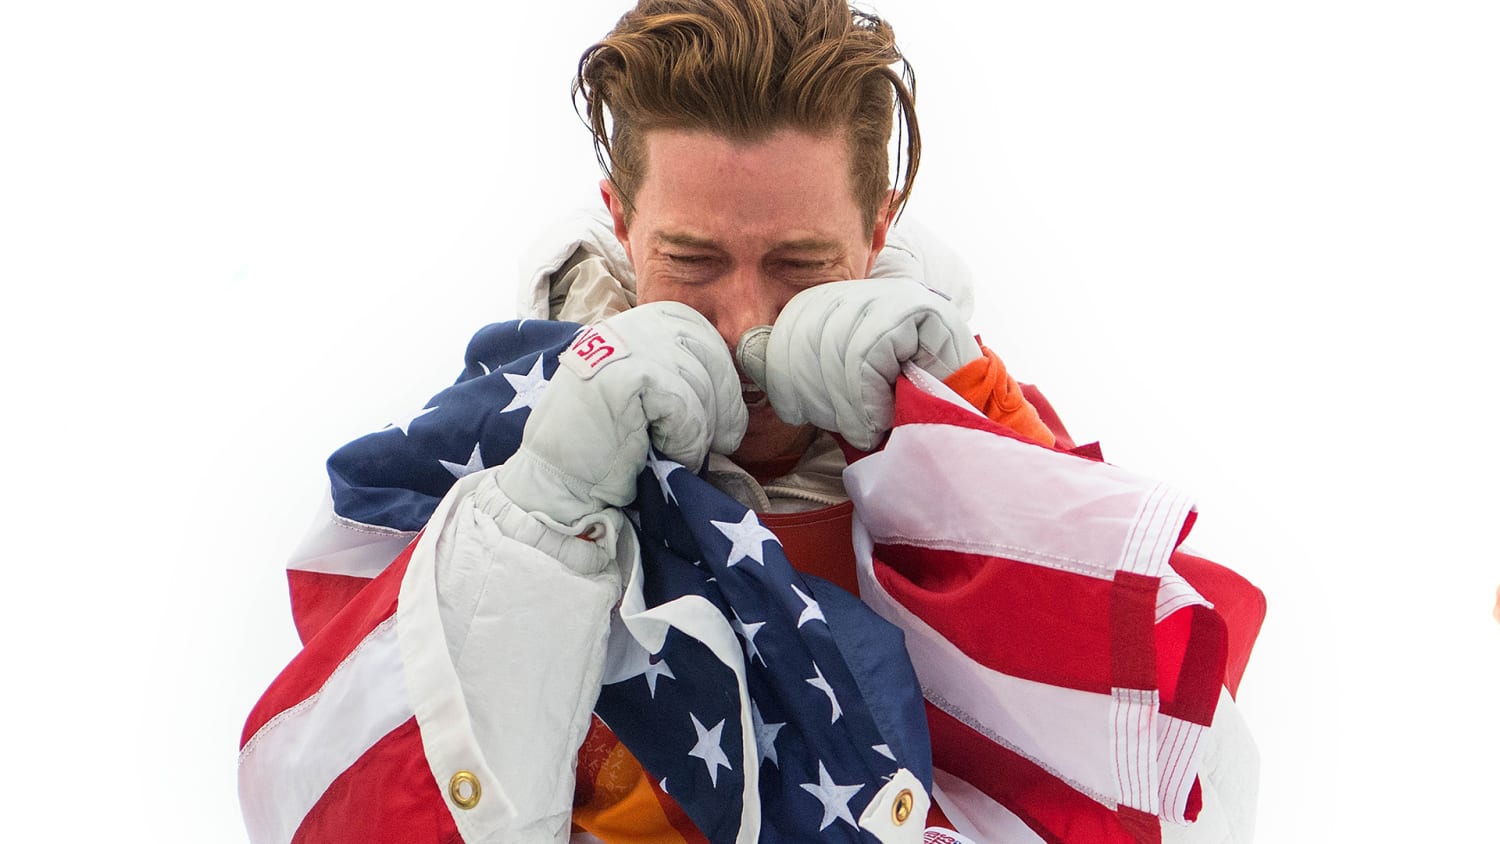 Shaun White entering skateboard contests with eye on Summer